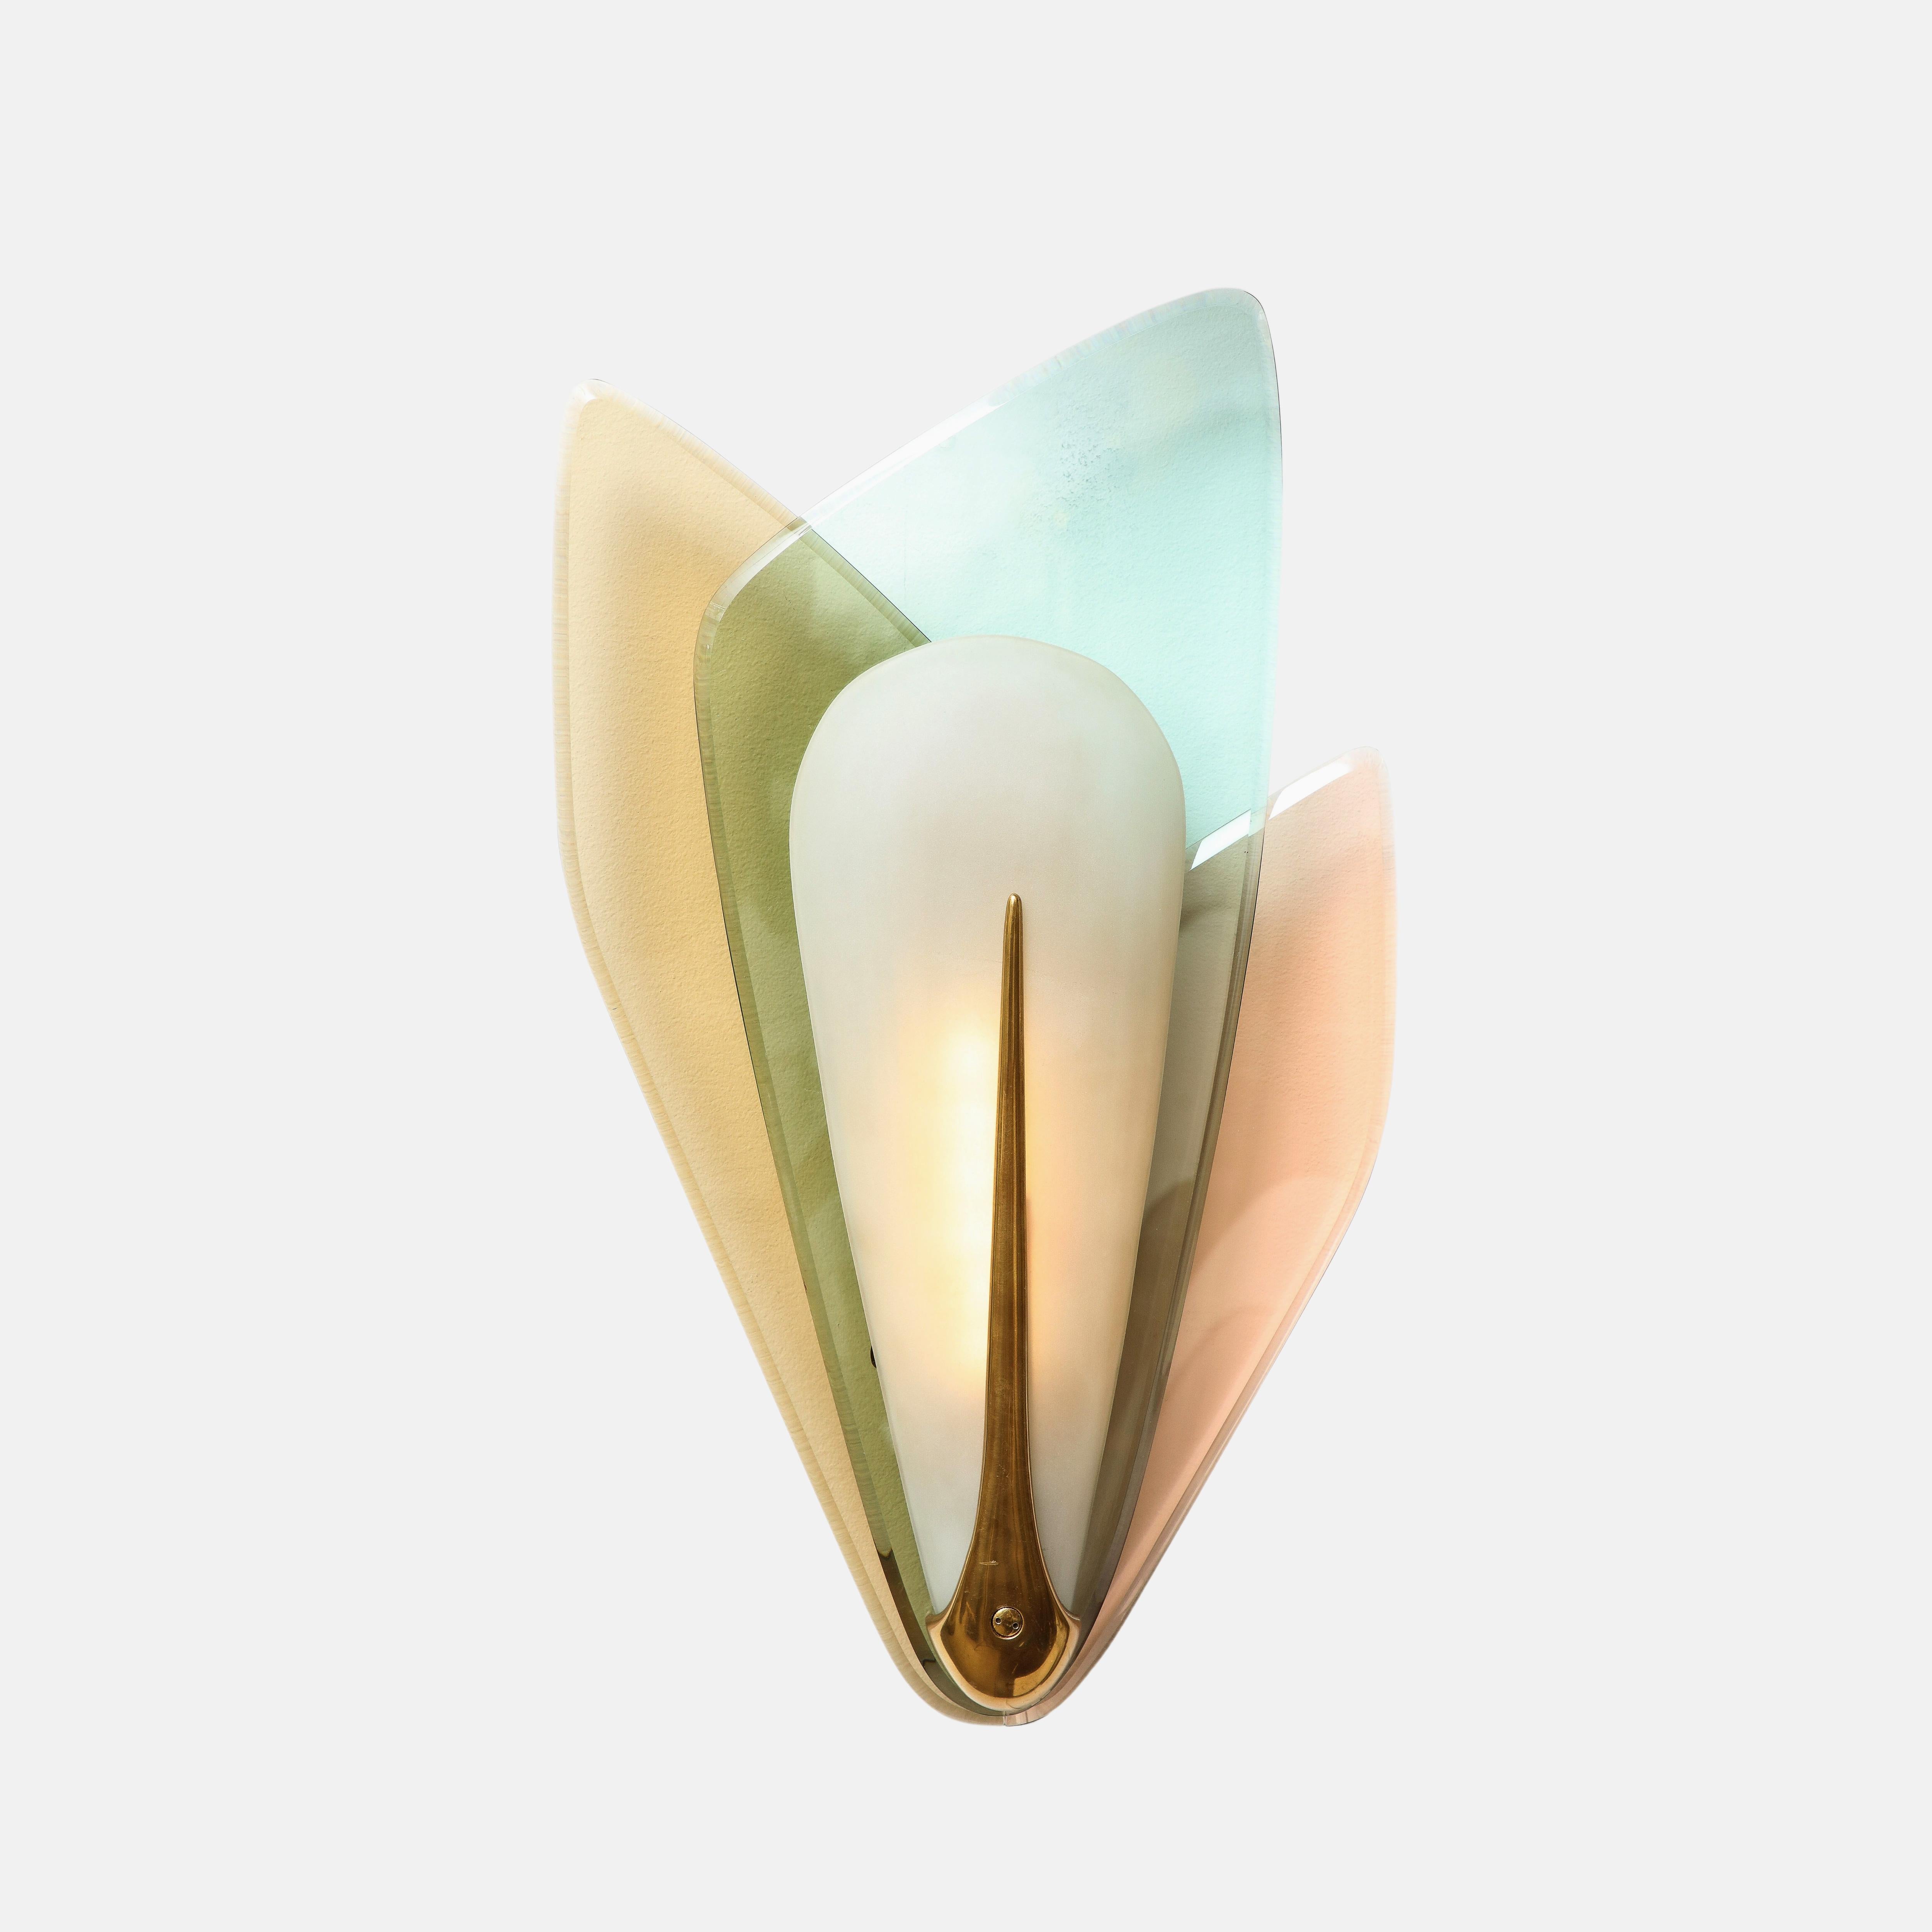 Max Ingrand for Fontana Arte rare and extraordinary pair of large sconces with three different beveled colored crystal glass layers fanning out from a central satin glass diffuser with an elegant brass teardrop mount, Italy, circa 1955.  This